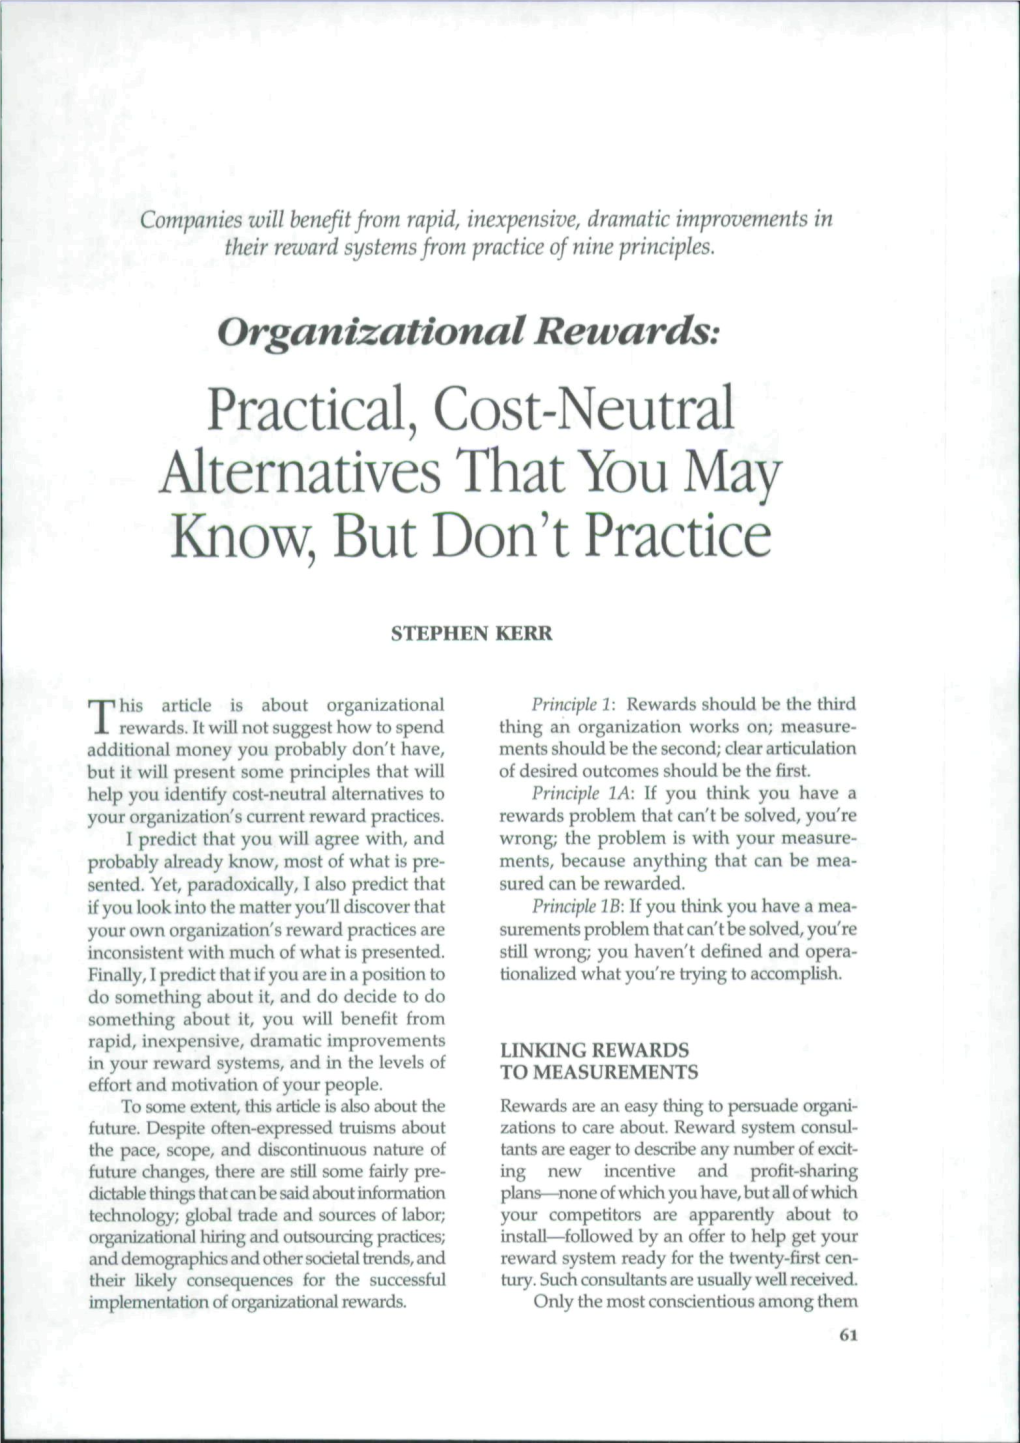 Organizational Rewards: Practical, Cost-Neutral Alternatives That You May Know, but Don't Practice